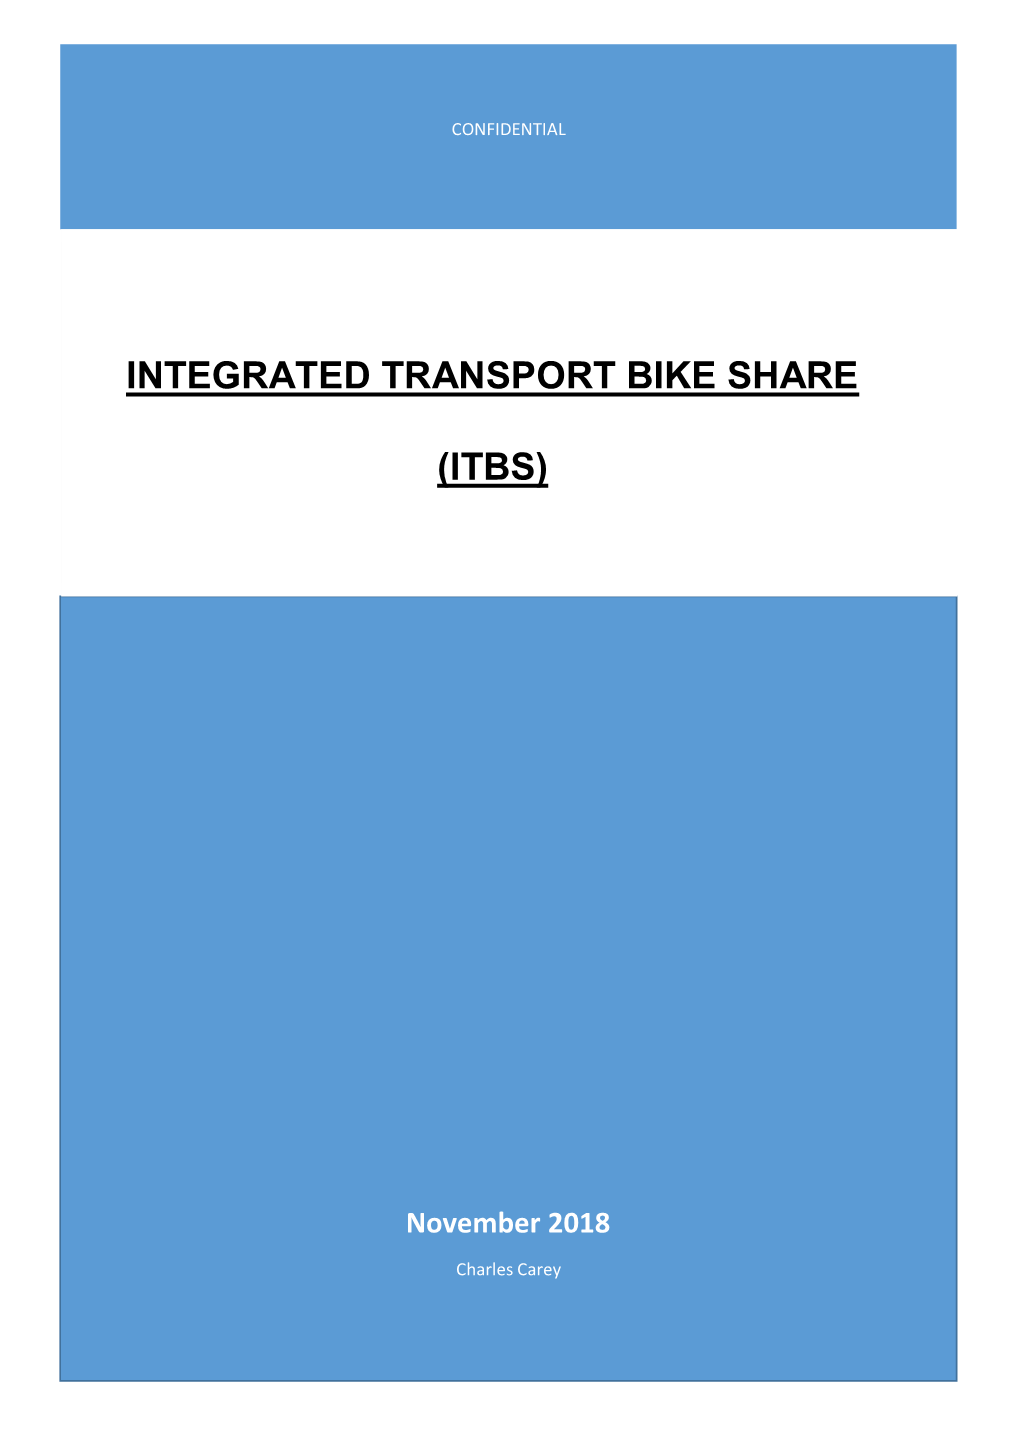 Integrated Transport Bike Share (ITBS)